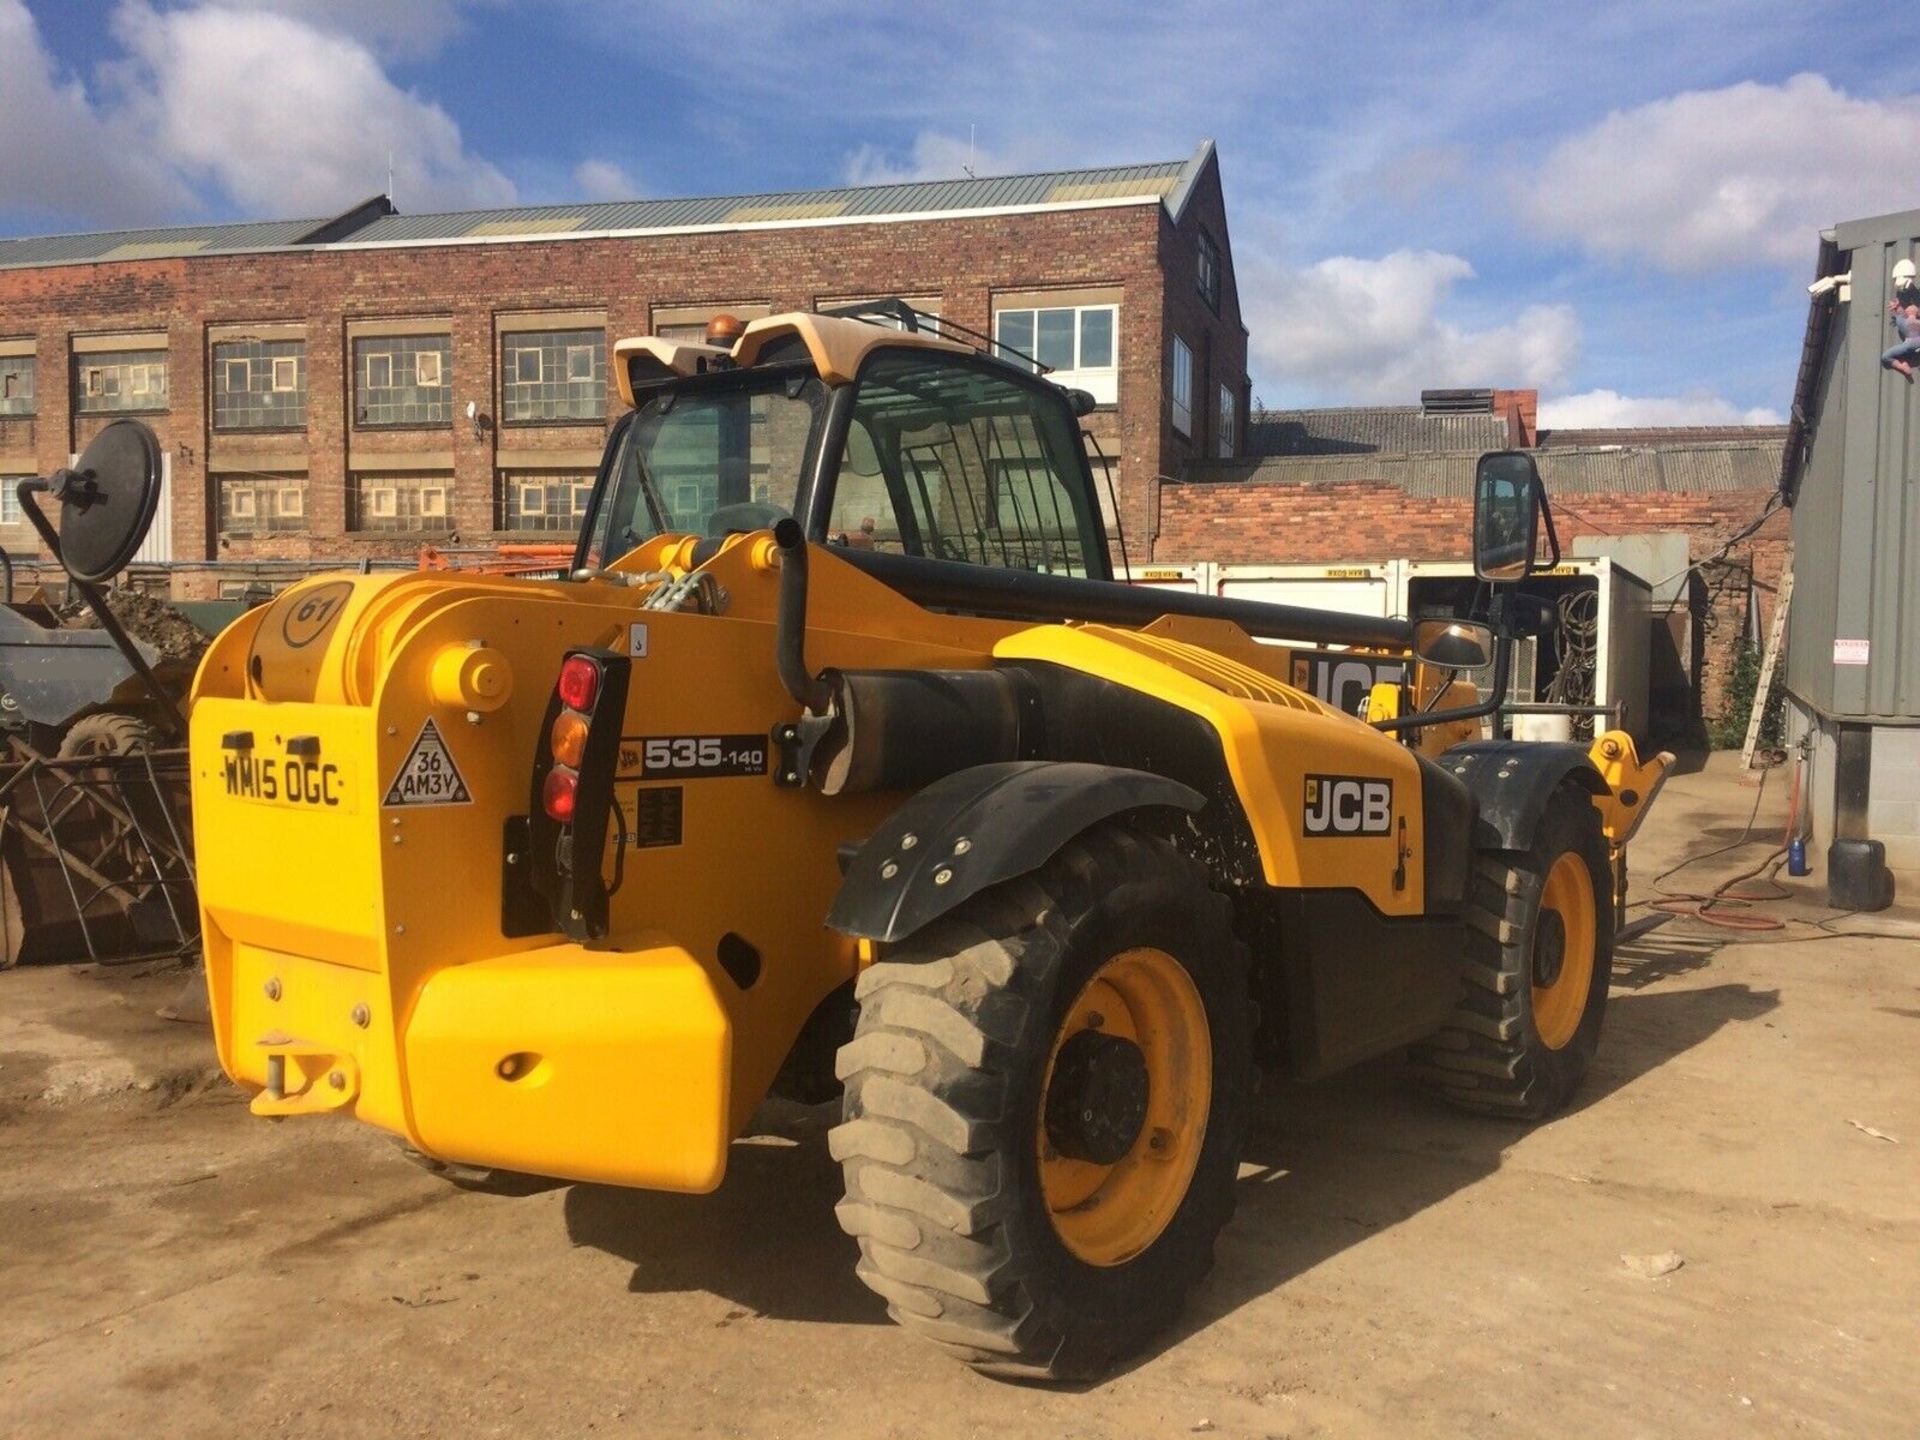 2015 T4 TURBO 535 140 JCB LOADALL AIR CON SWAY / AUX LINE / ONLY 3280 HOURS, RUNS, WORKS, LIFTS - Image 2 of 6